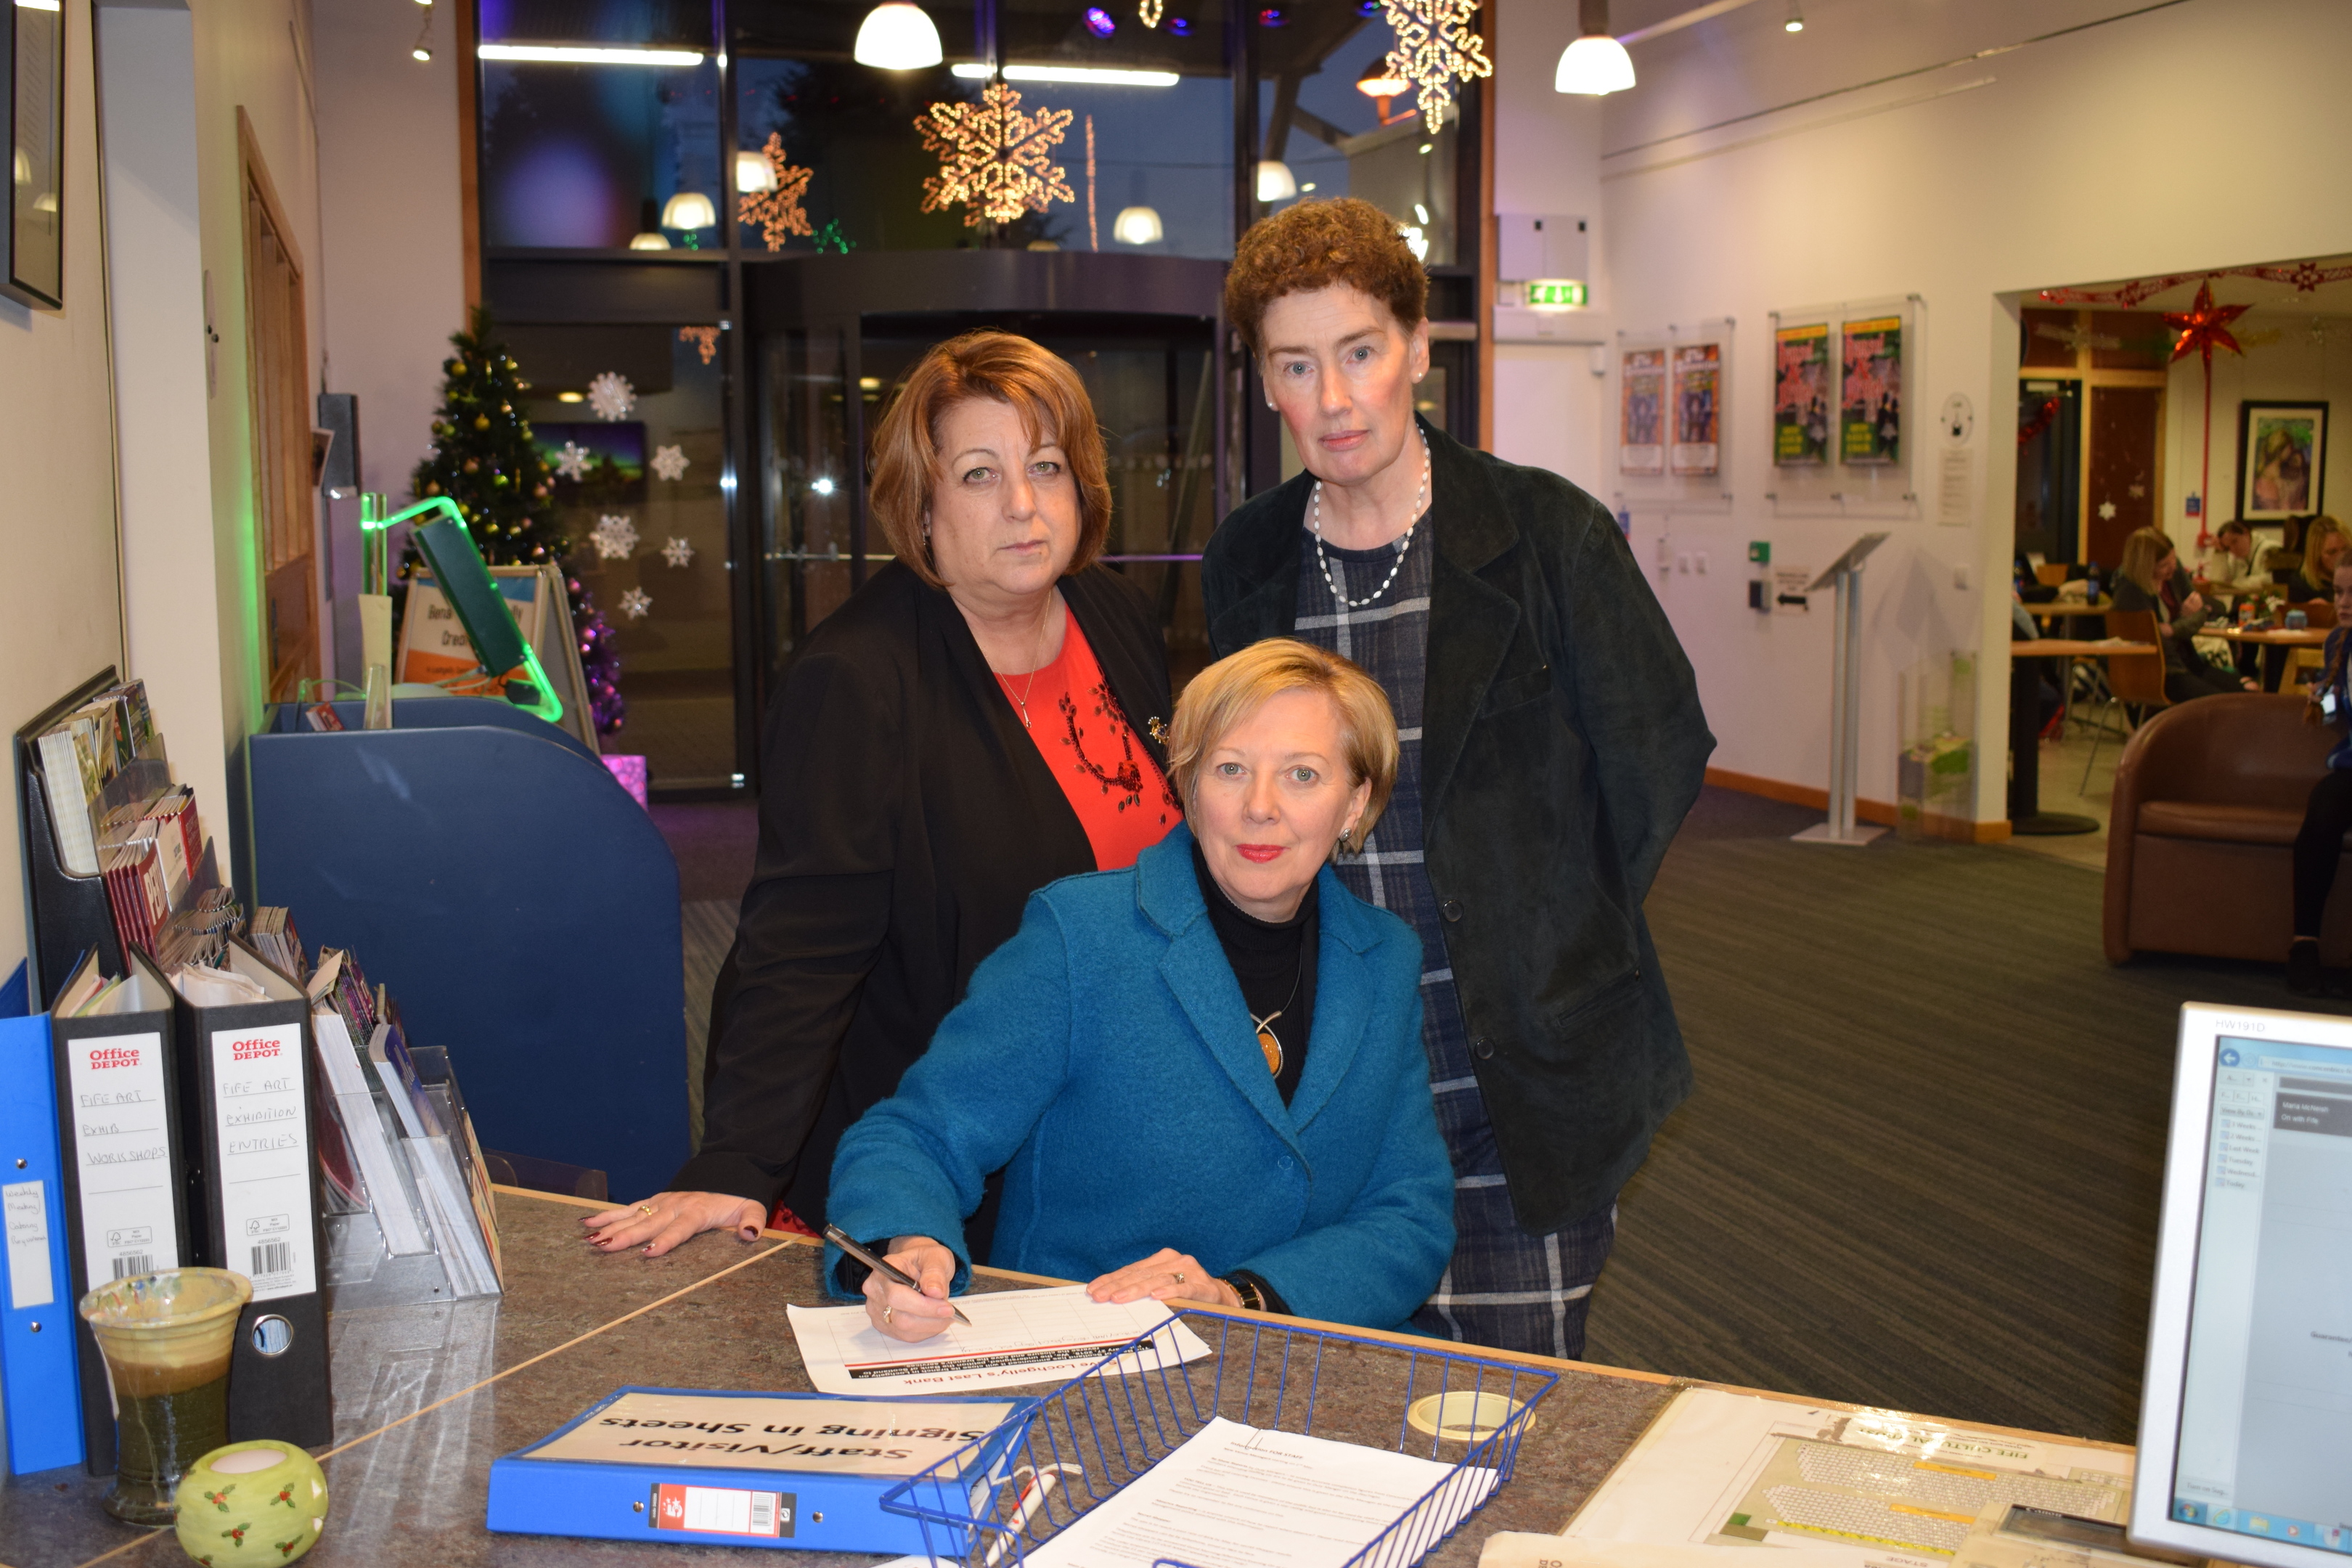 Lesley Laird with Councillor Linda Erskine (left) and Councillor Mary Lockhart (right).